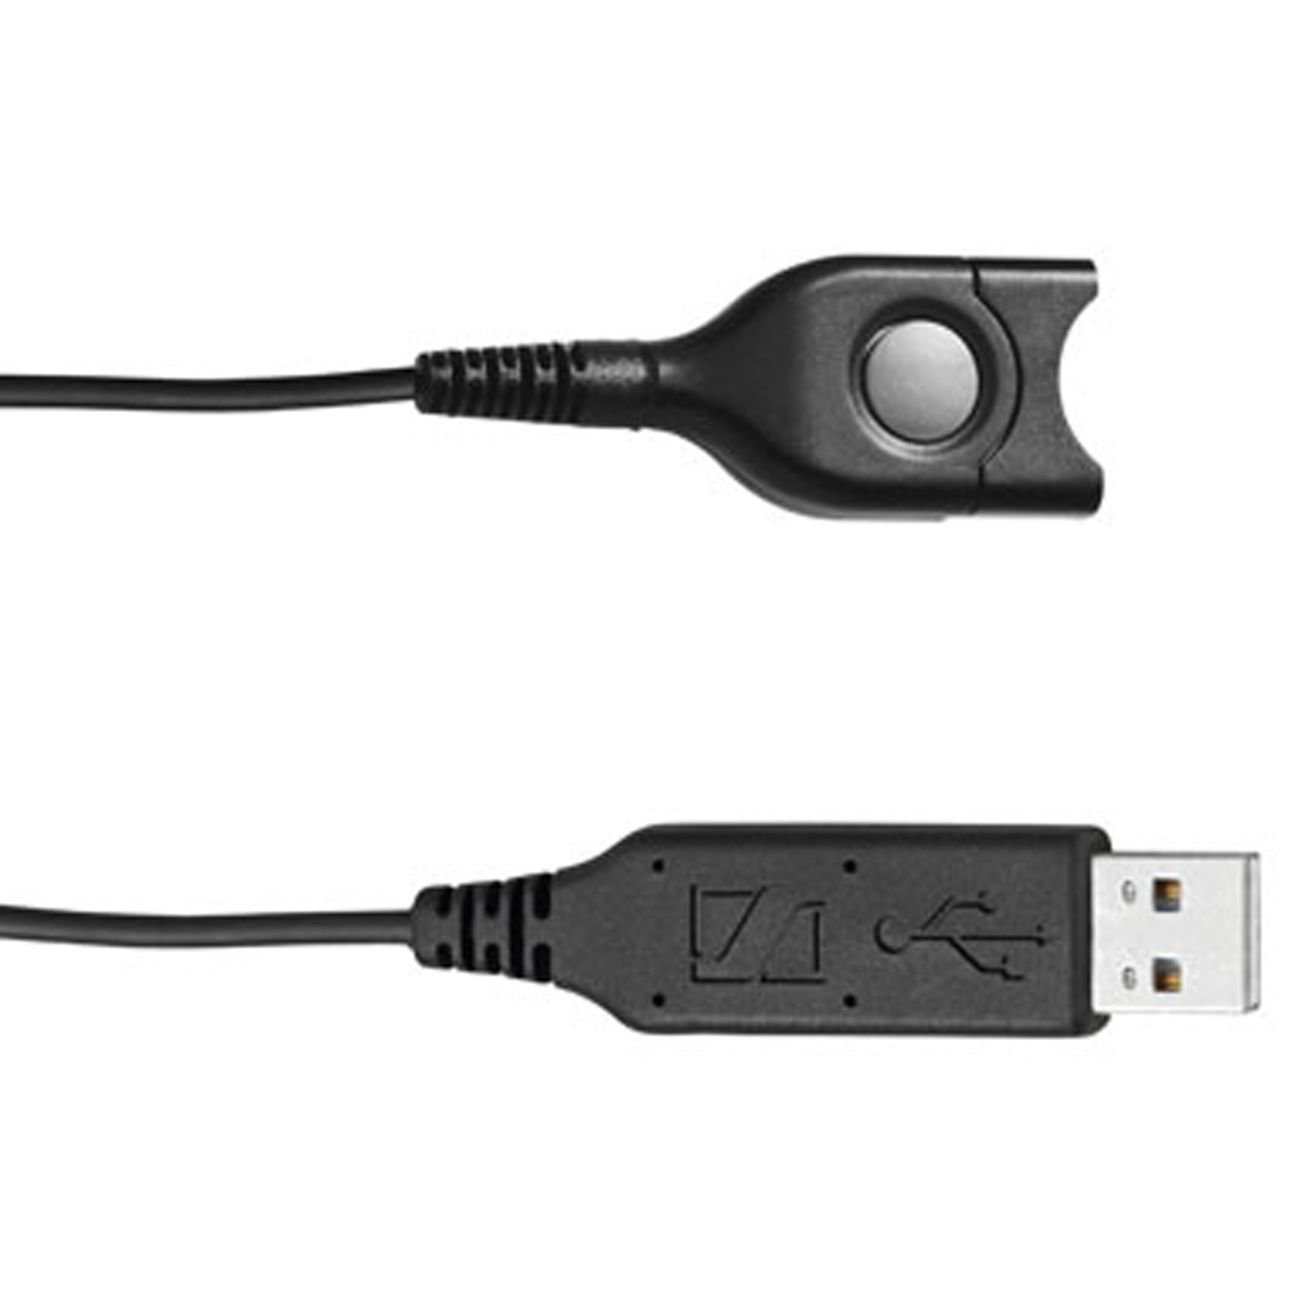 Sennheiser Headset connection cable: USB - EasyDisconnect (sound card integrated in USB plug)